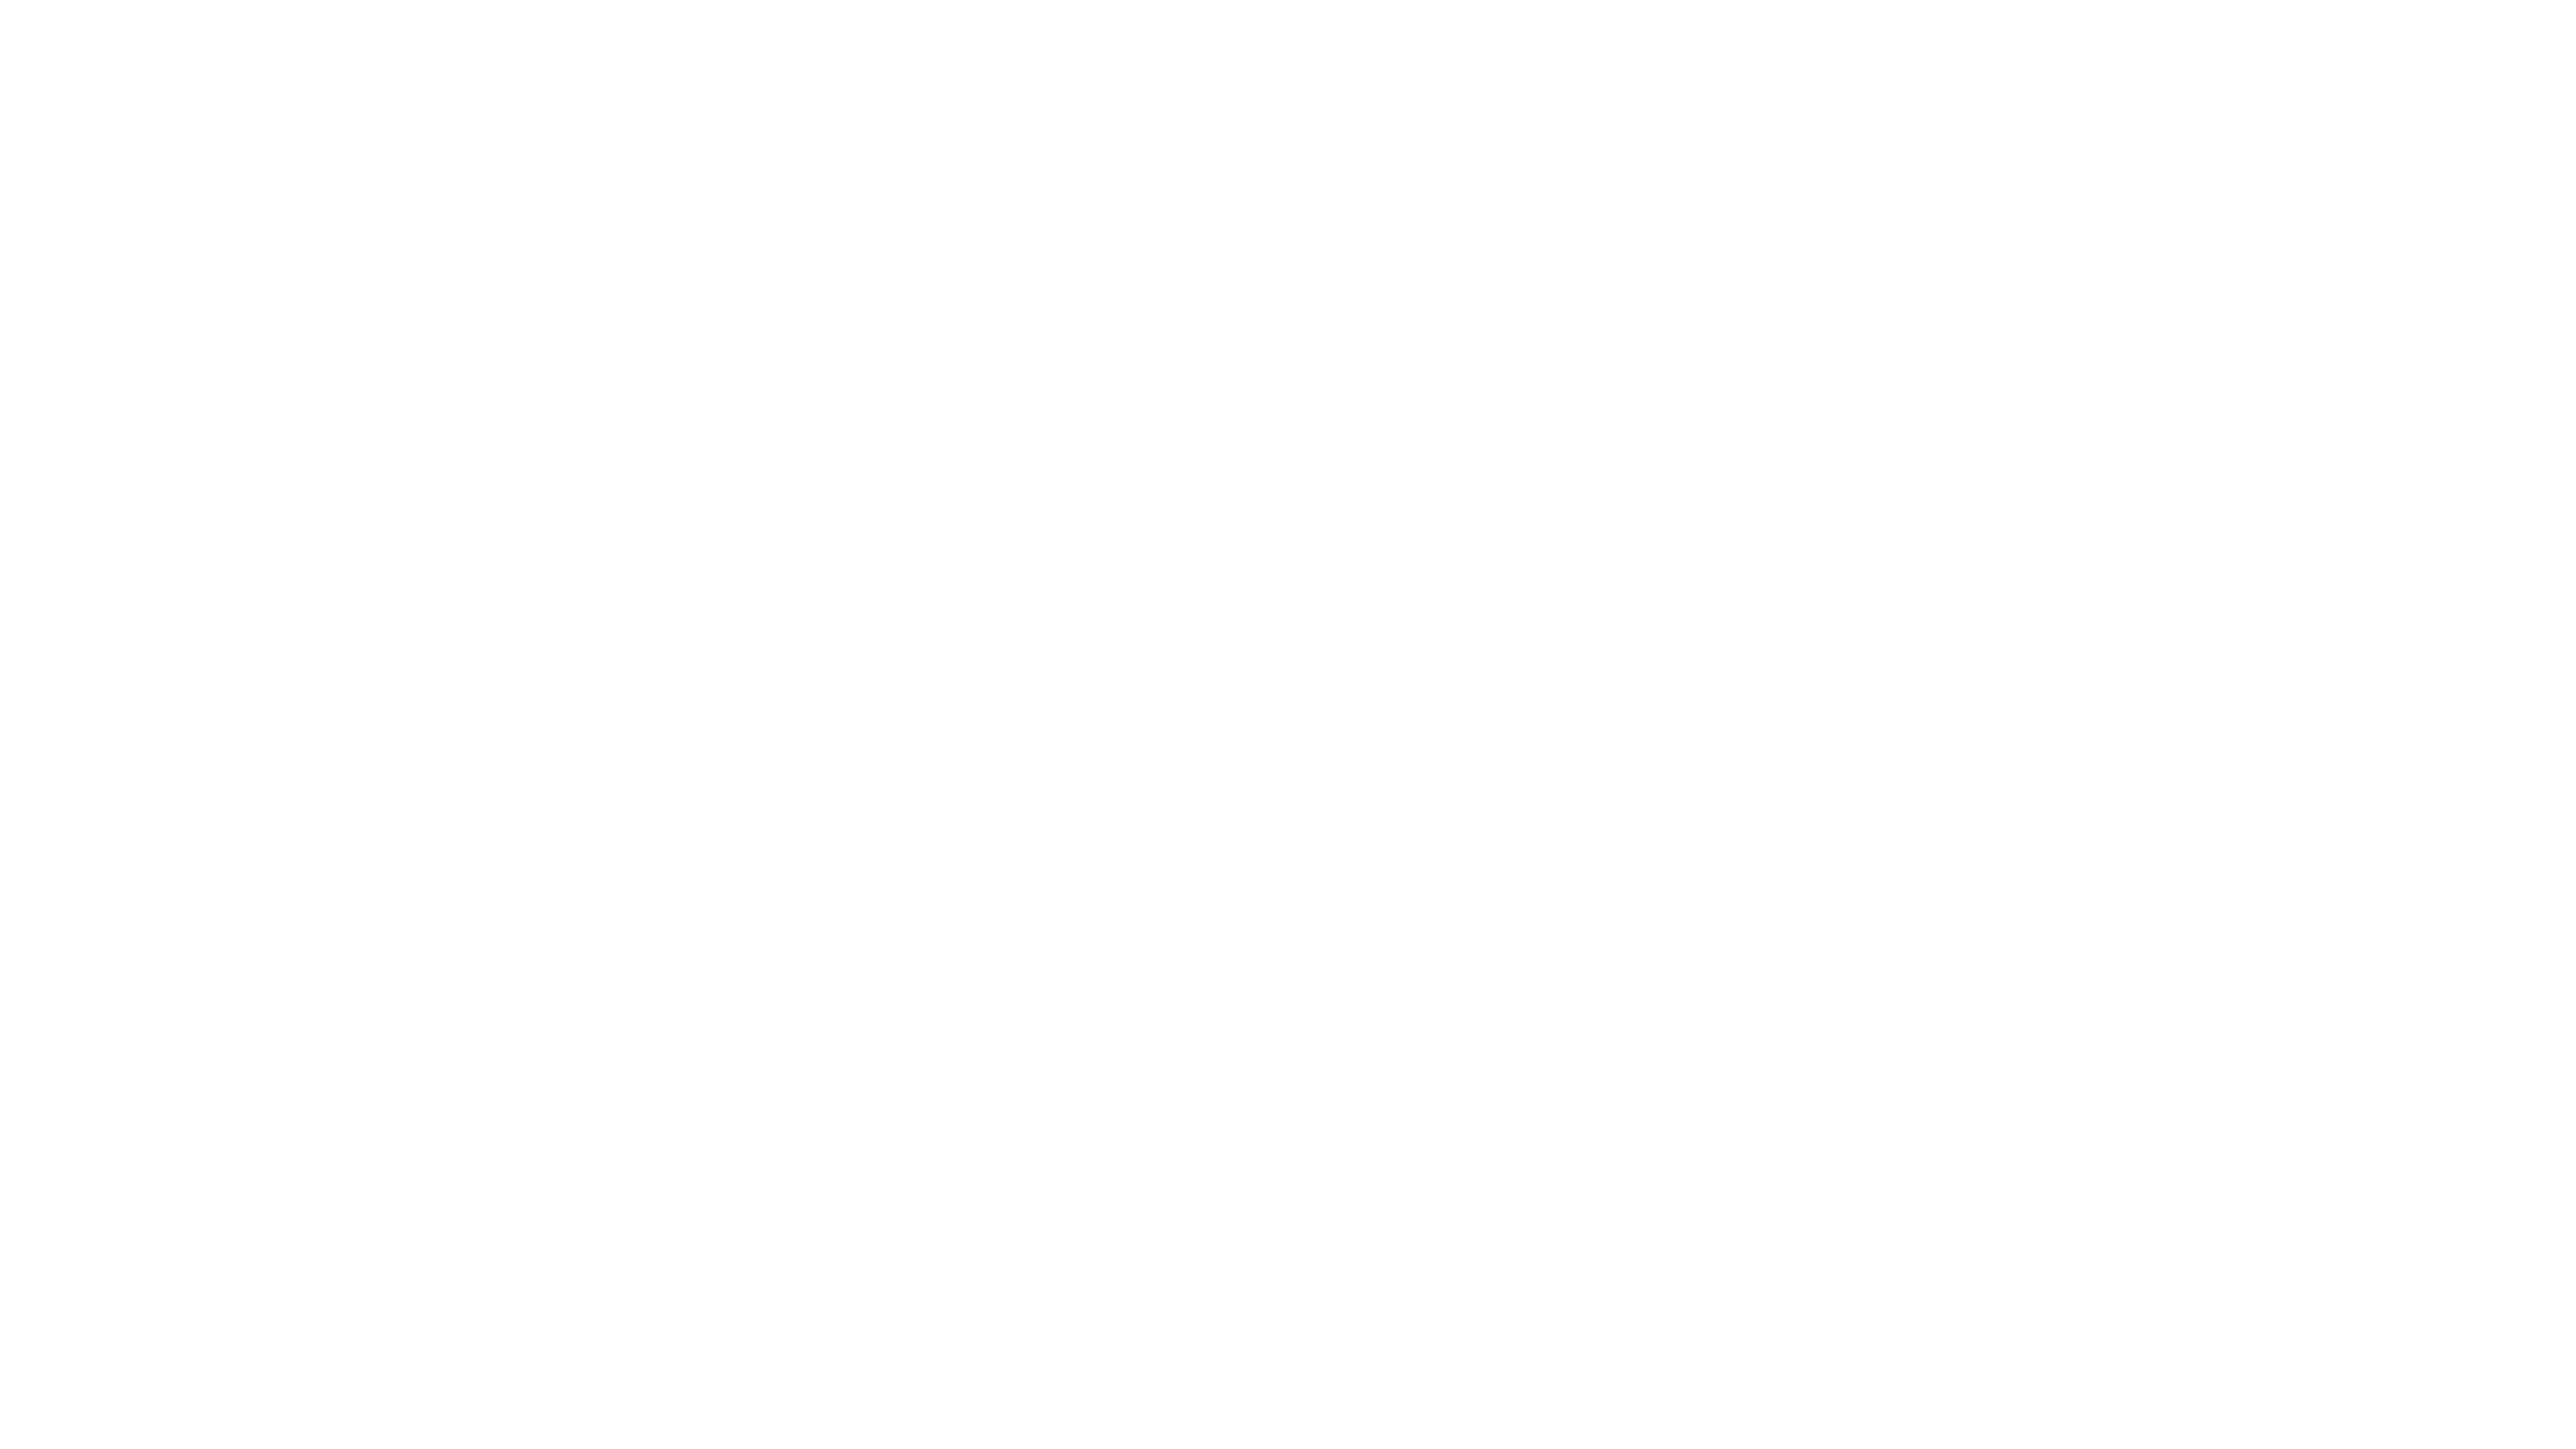 Esports Awards 2023: Here are all the finalists